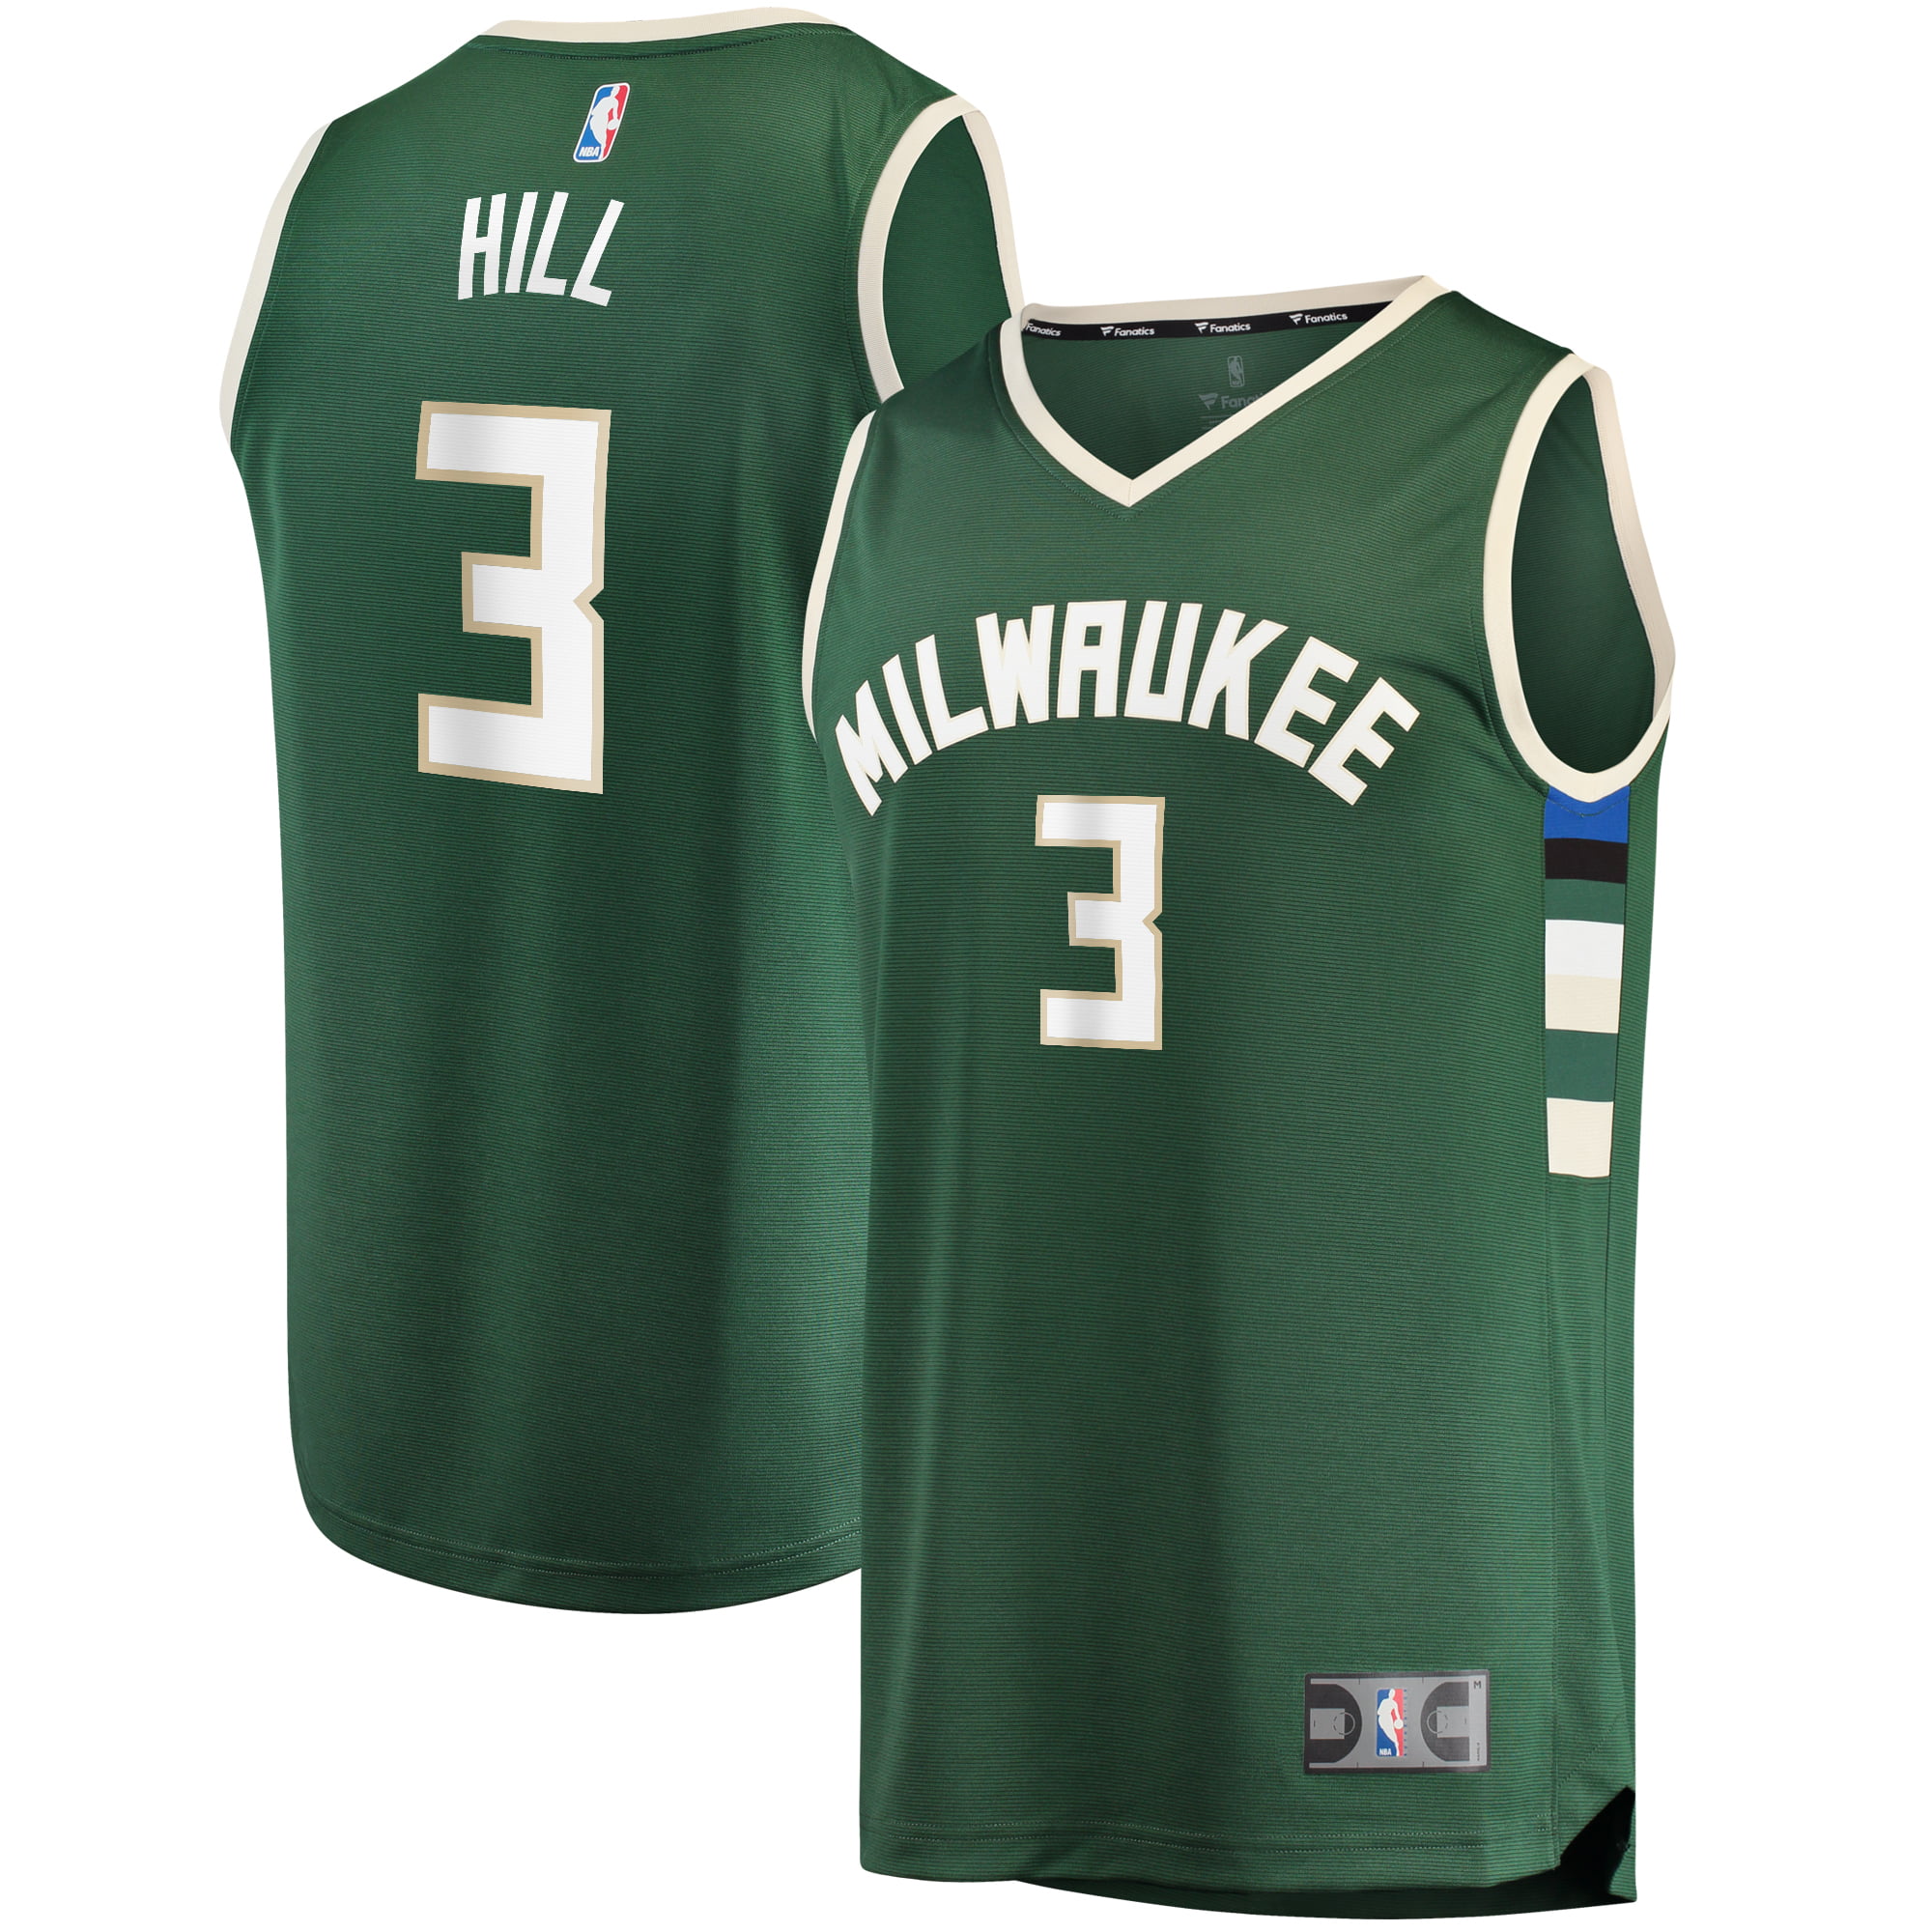 george hill jersey